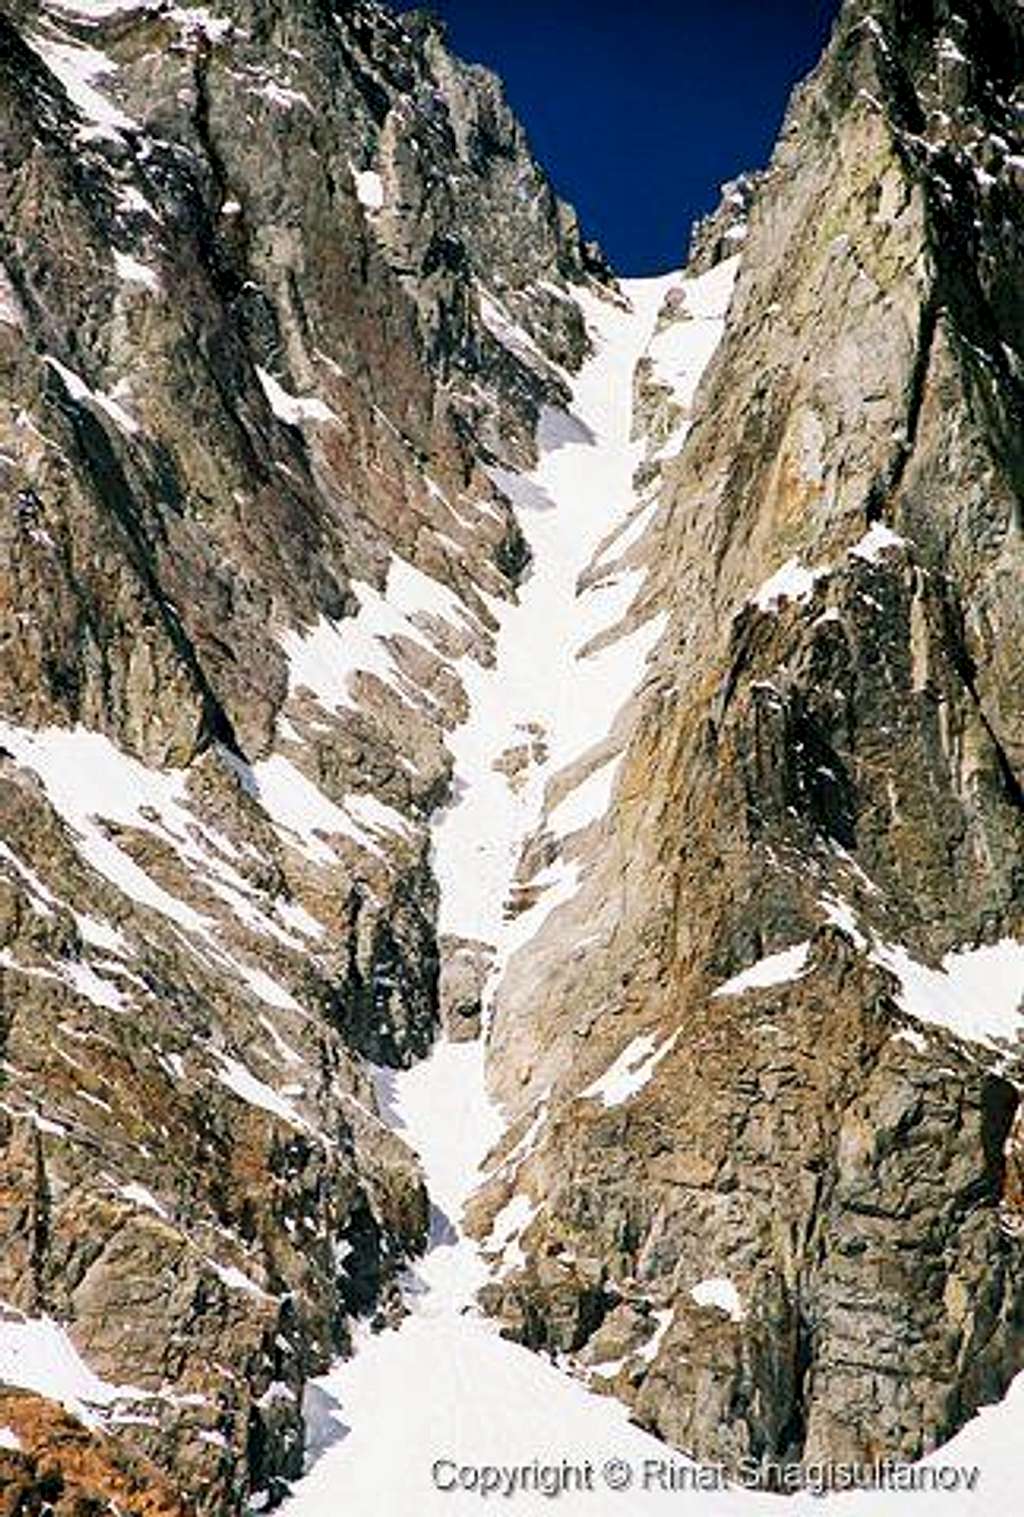 East Couloir May 7, 2006